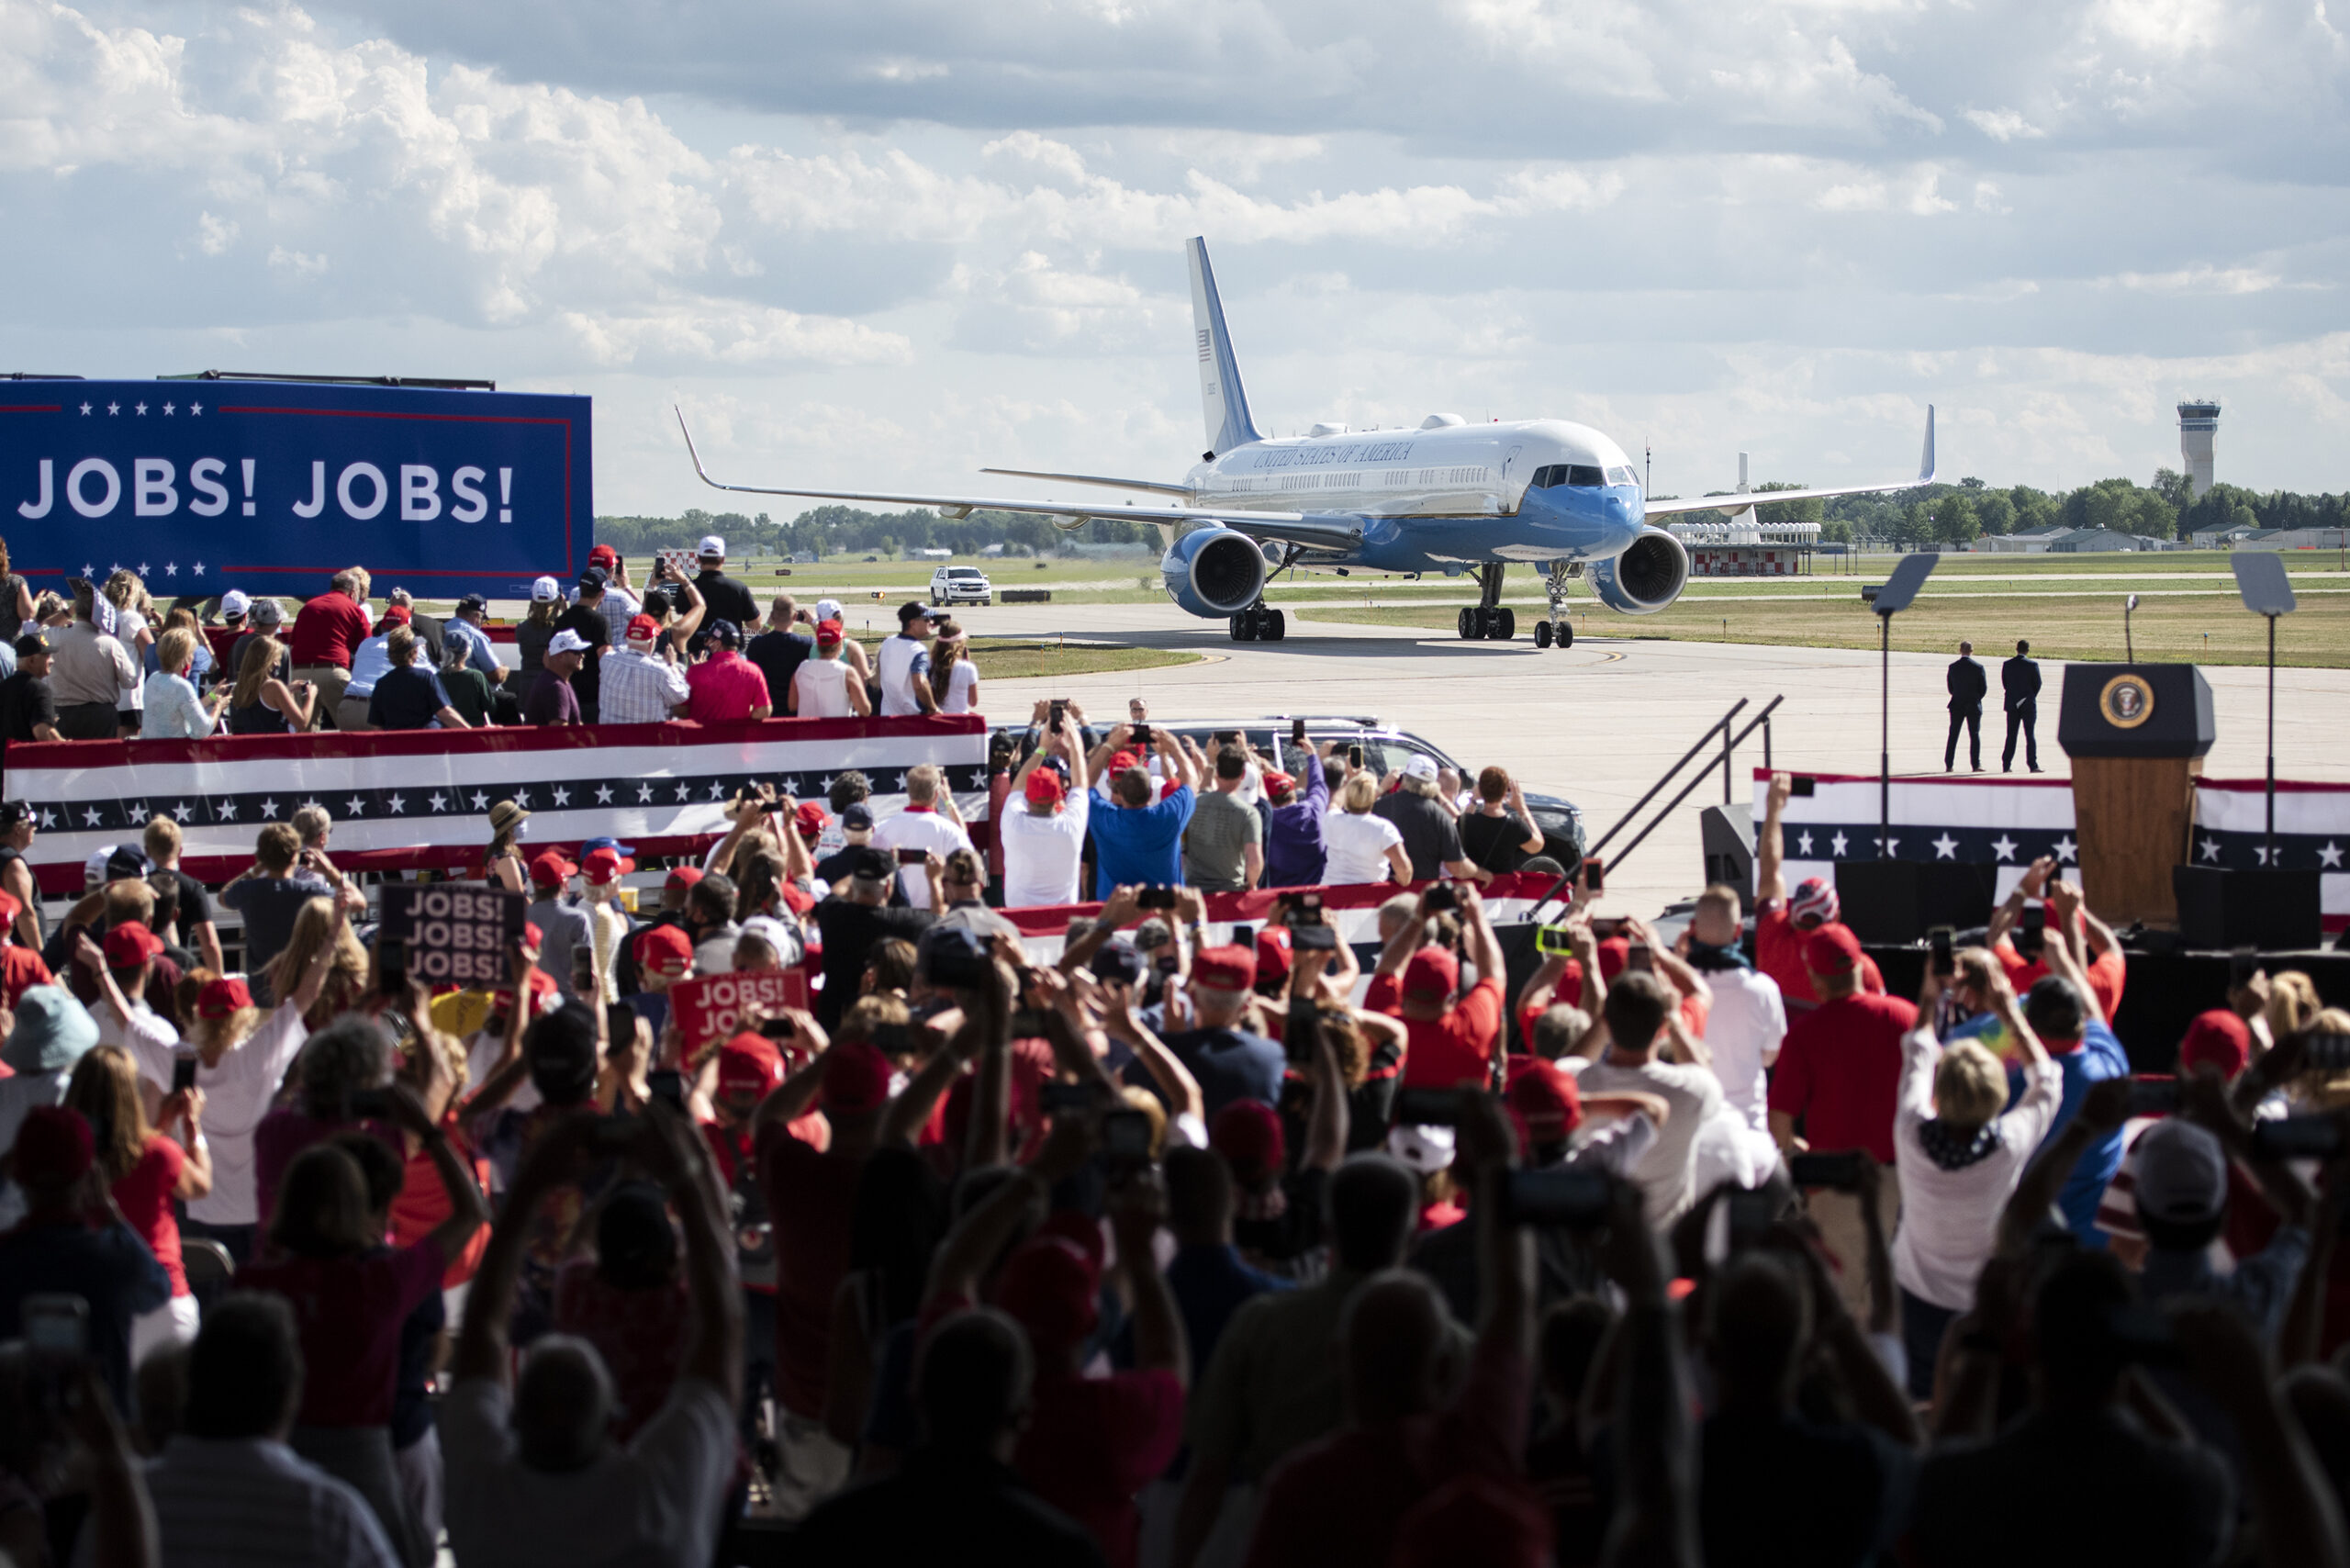 the crowd cheers as Air Force one drives up on the runway